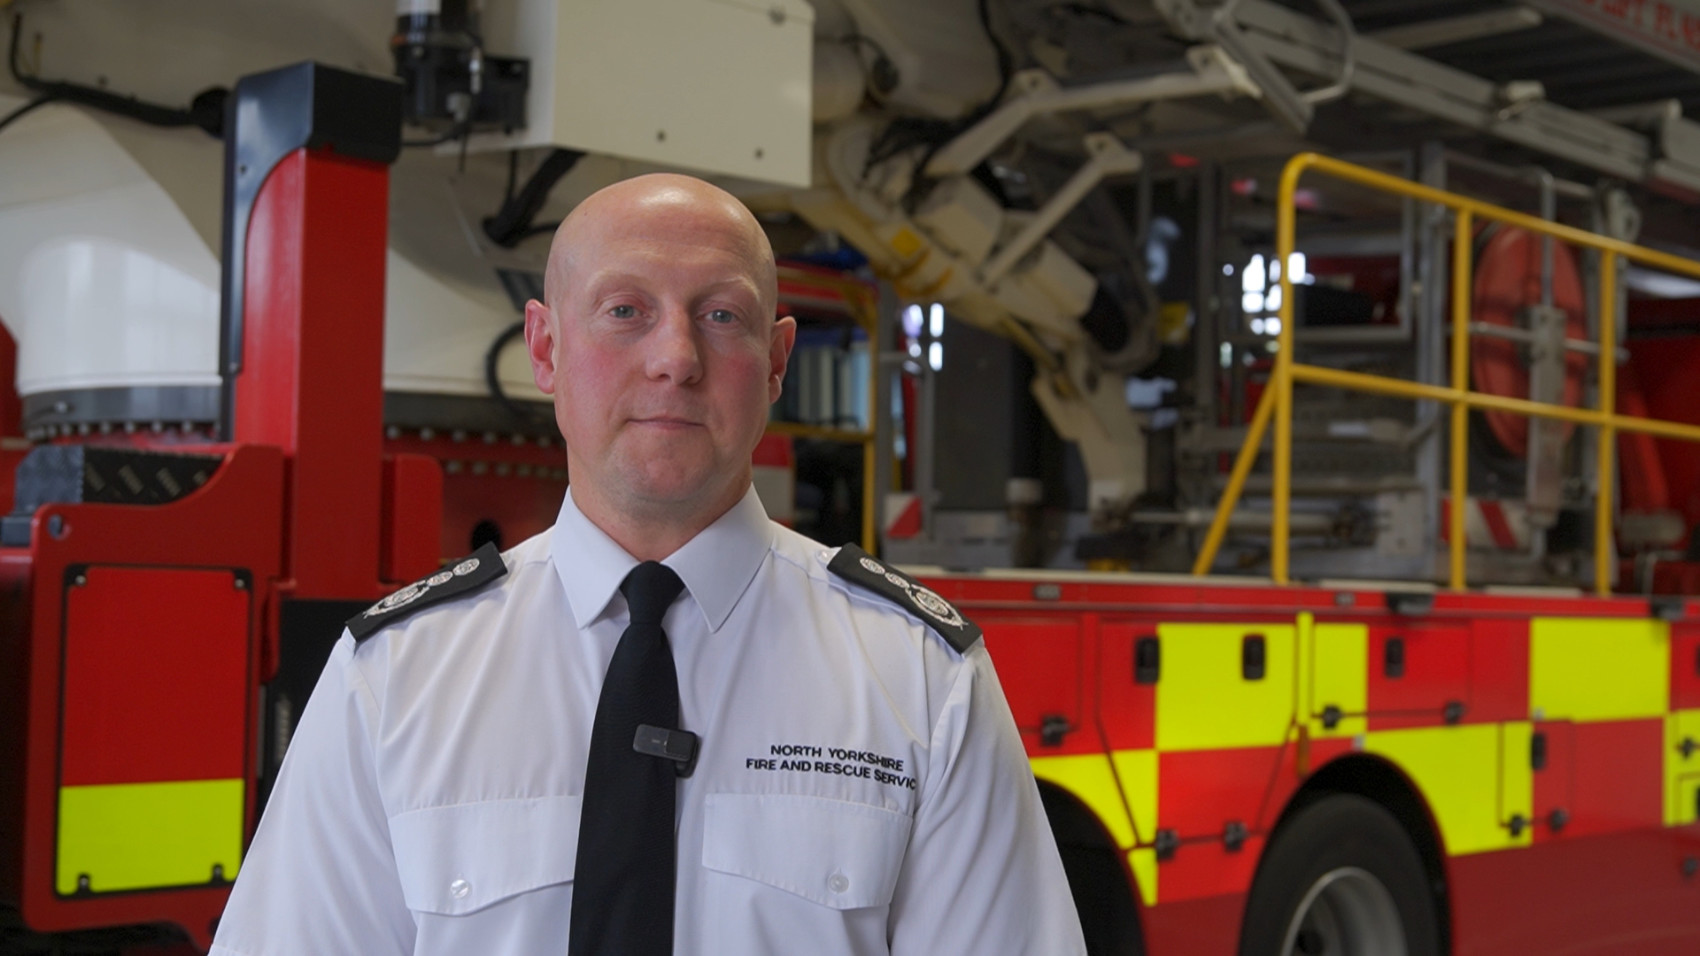 John Dyson, Chief Fire Officer, North Yorkshire Fire and Rescue